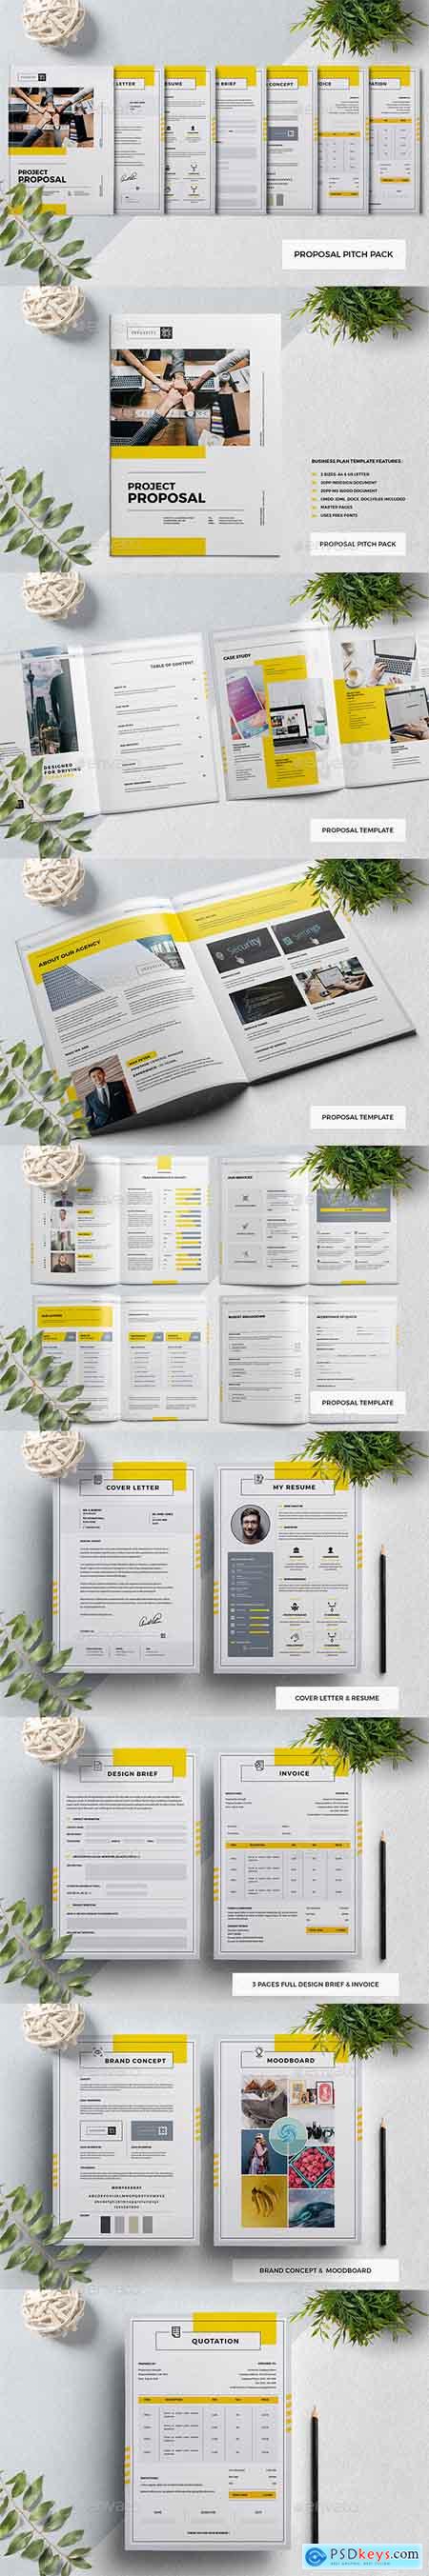 Graphicriver Proposal Pitch Pack V 1.0